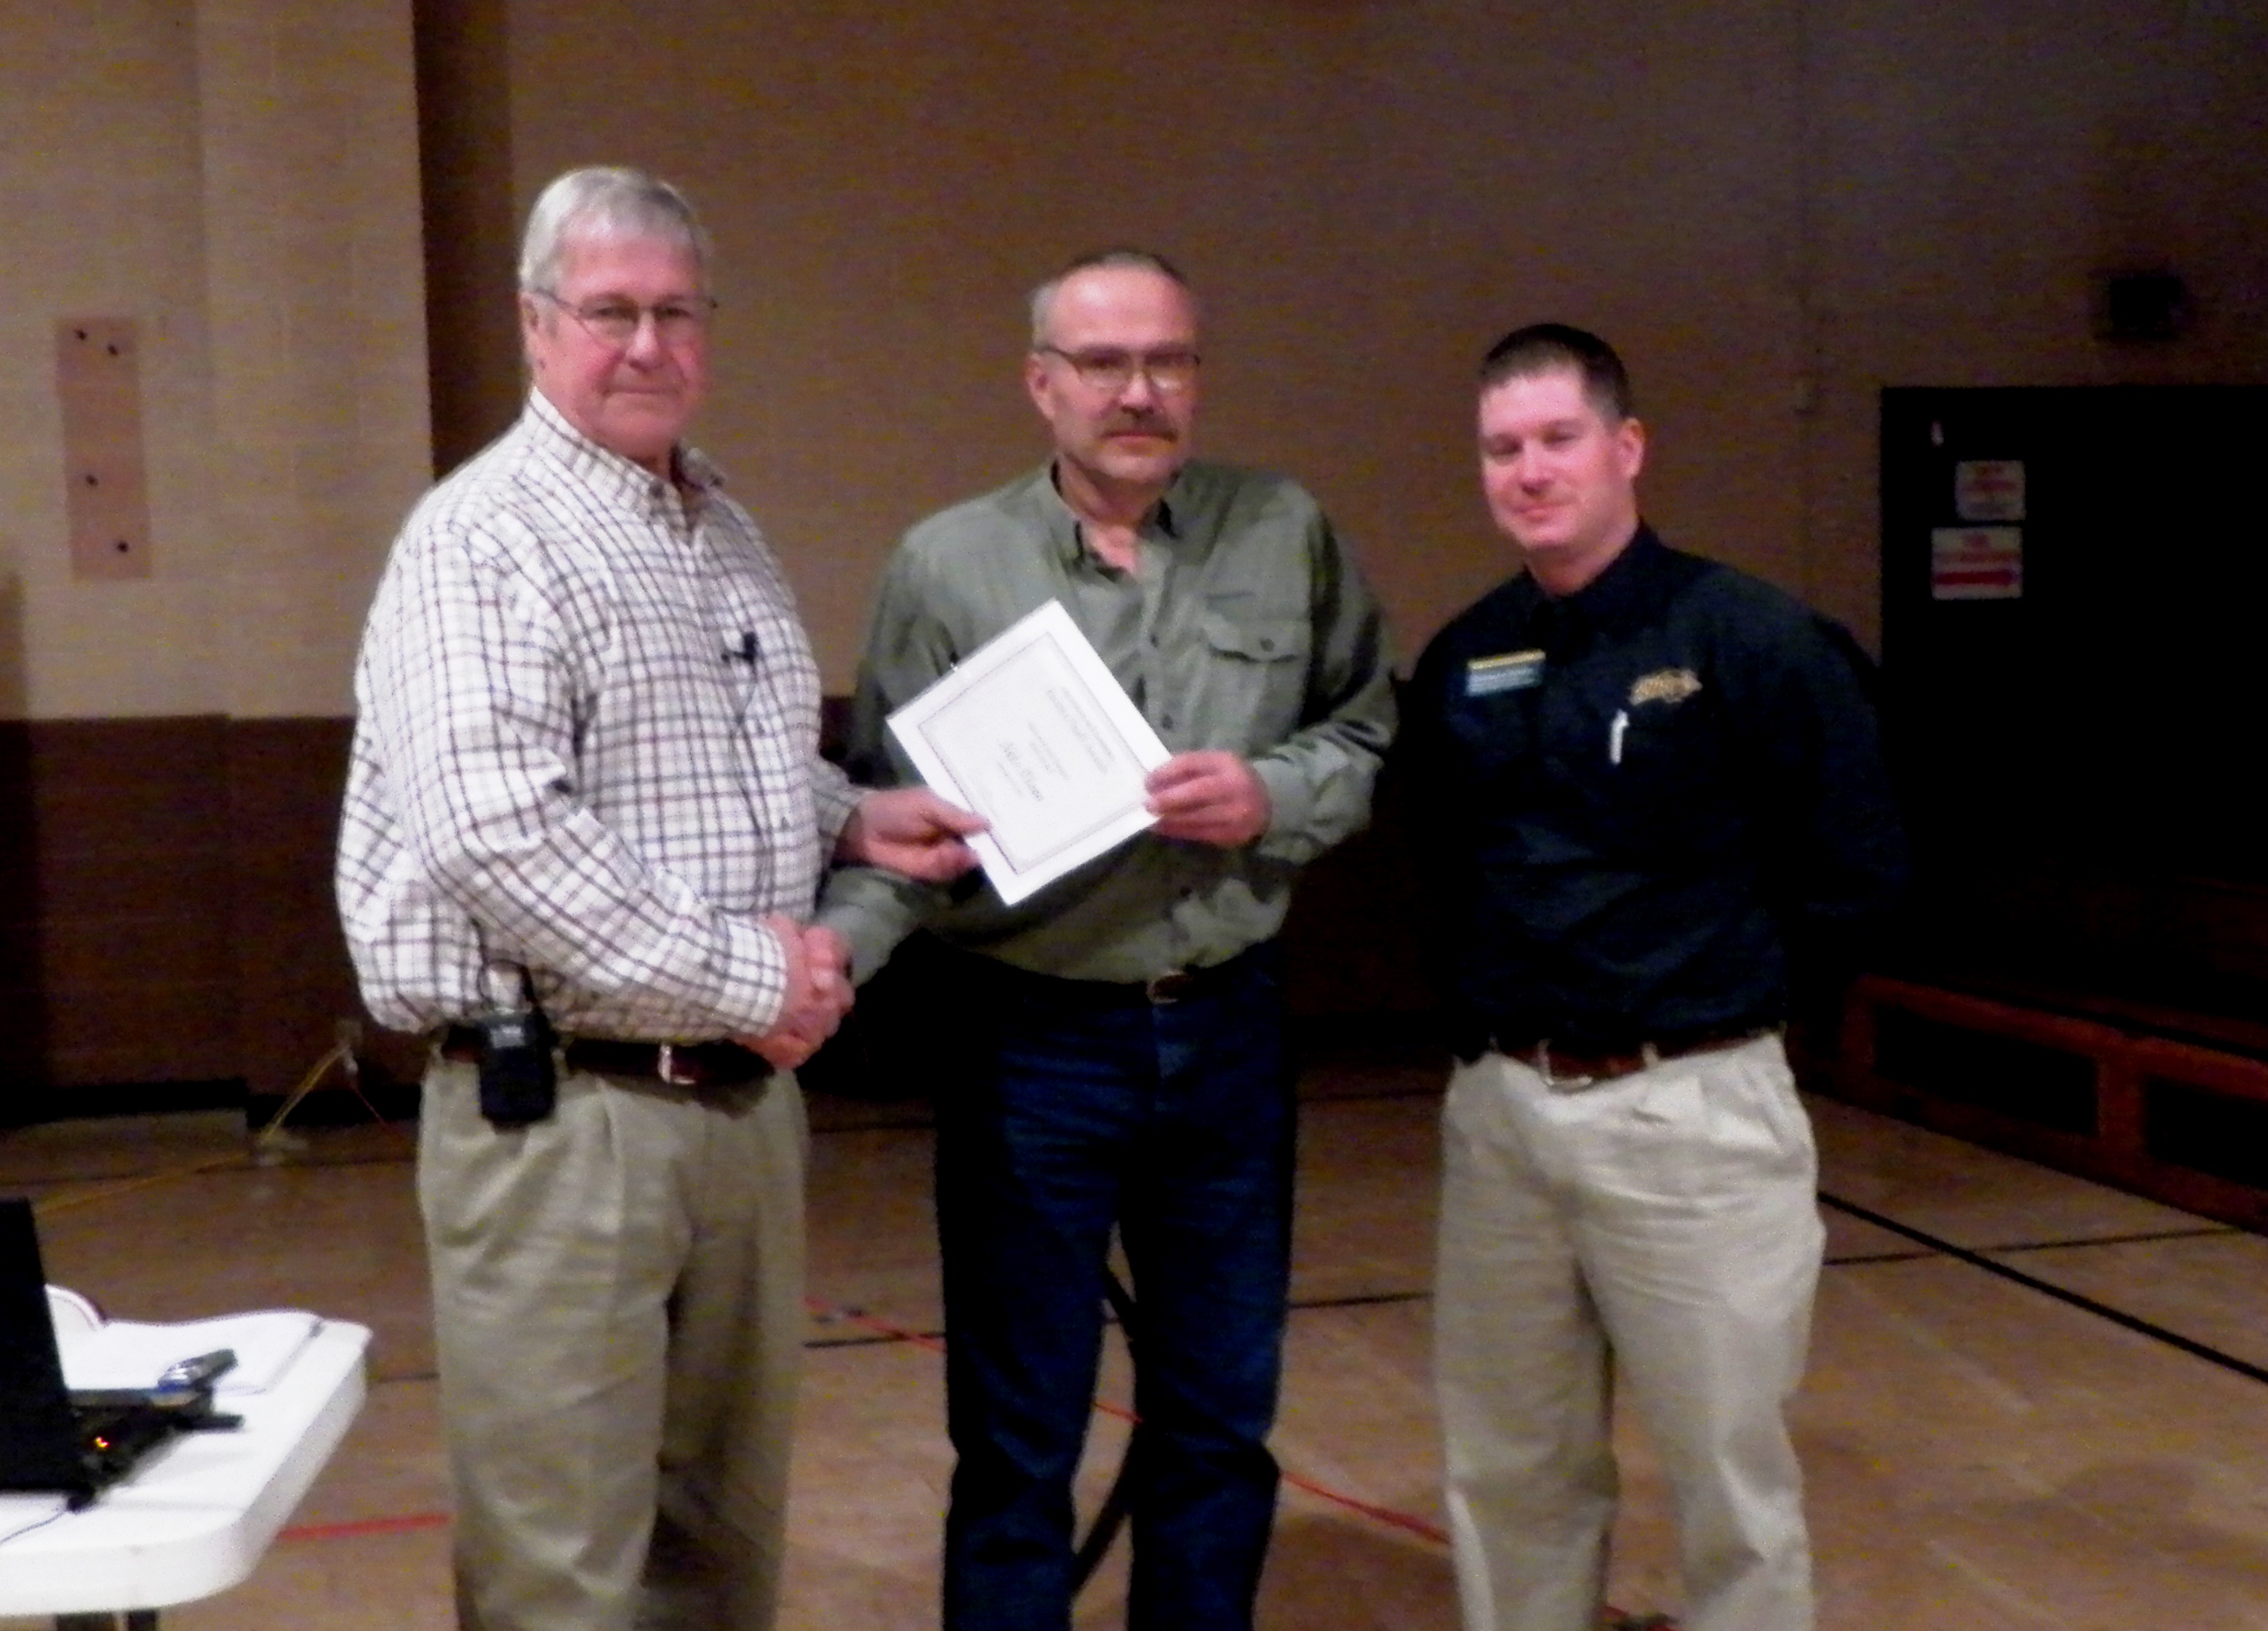 Nels (Rick) Olson (center) receives the Rick and Jody Burgum Staff Award from Tim Faller (left), Agricultural Experiment Station assistant director, and Chris Schauer (right), Hettinger REC director